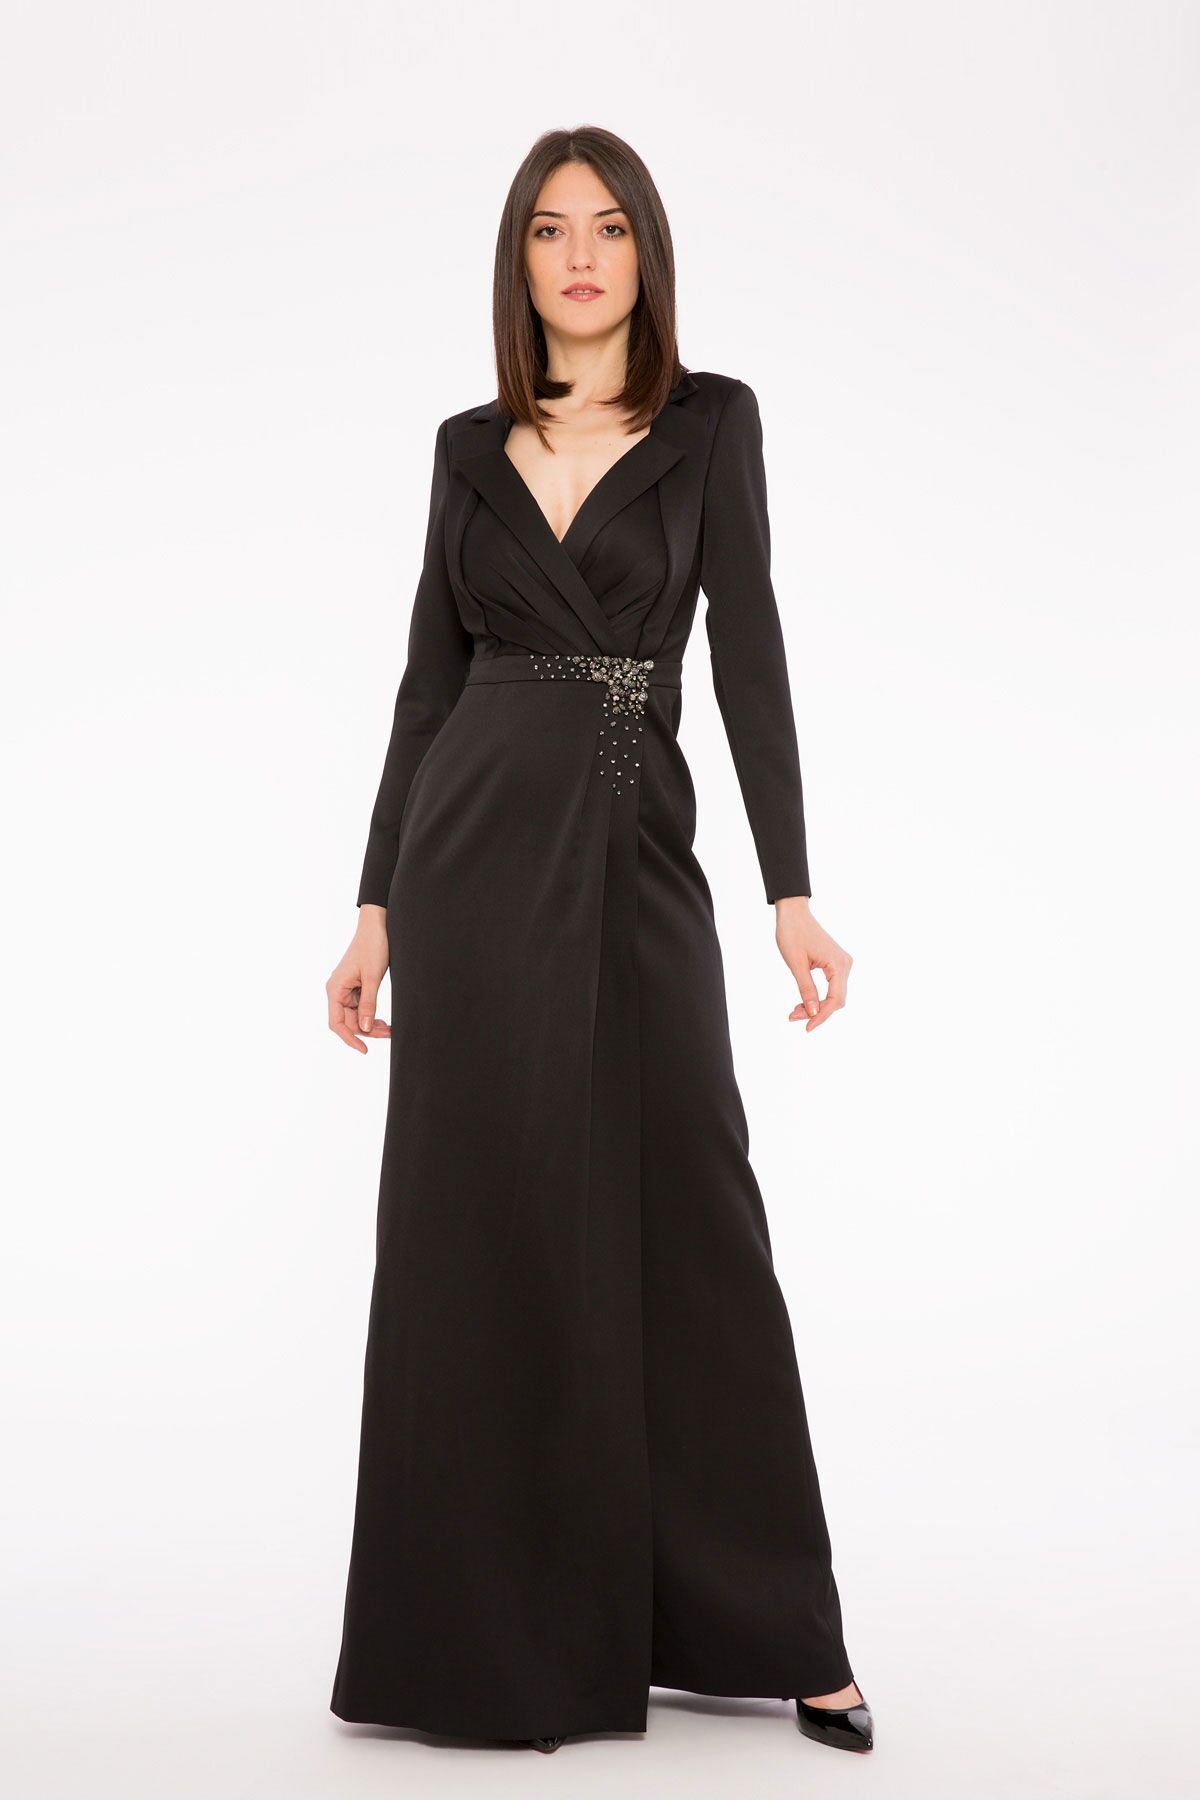 Long Black Evening Dress With Embroidery And Collar Detail